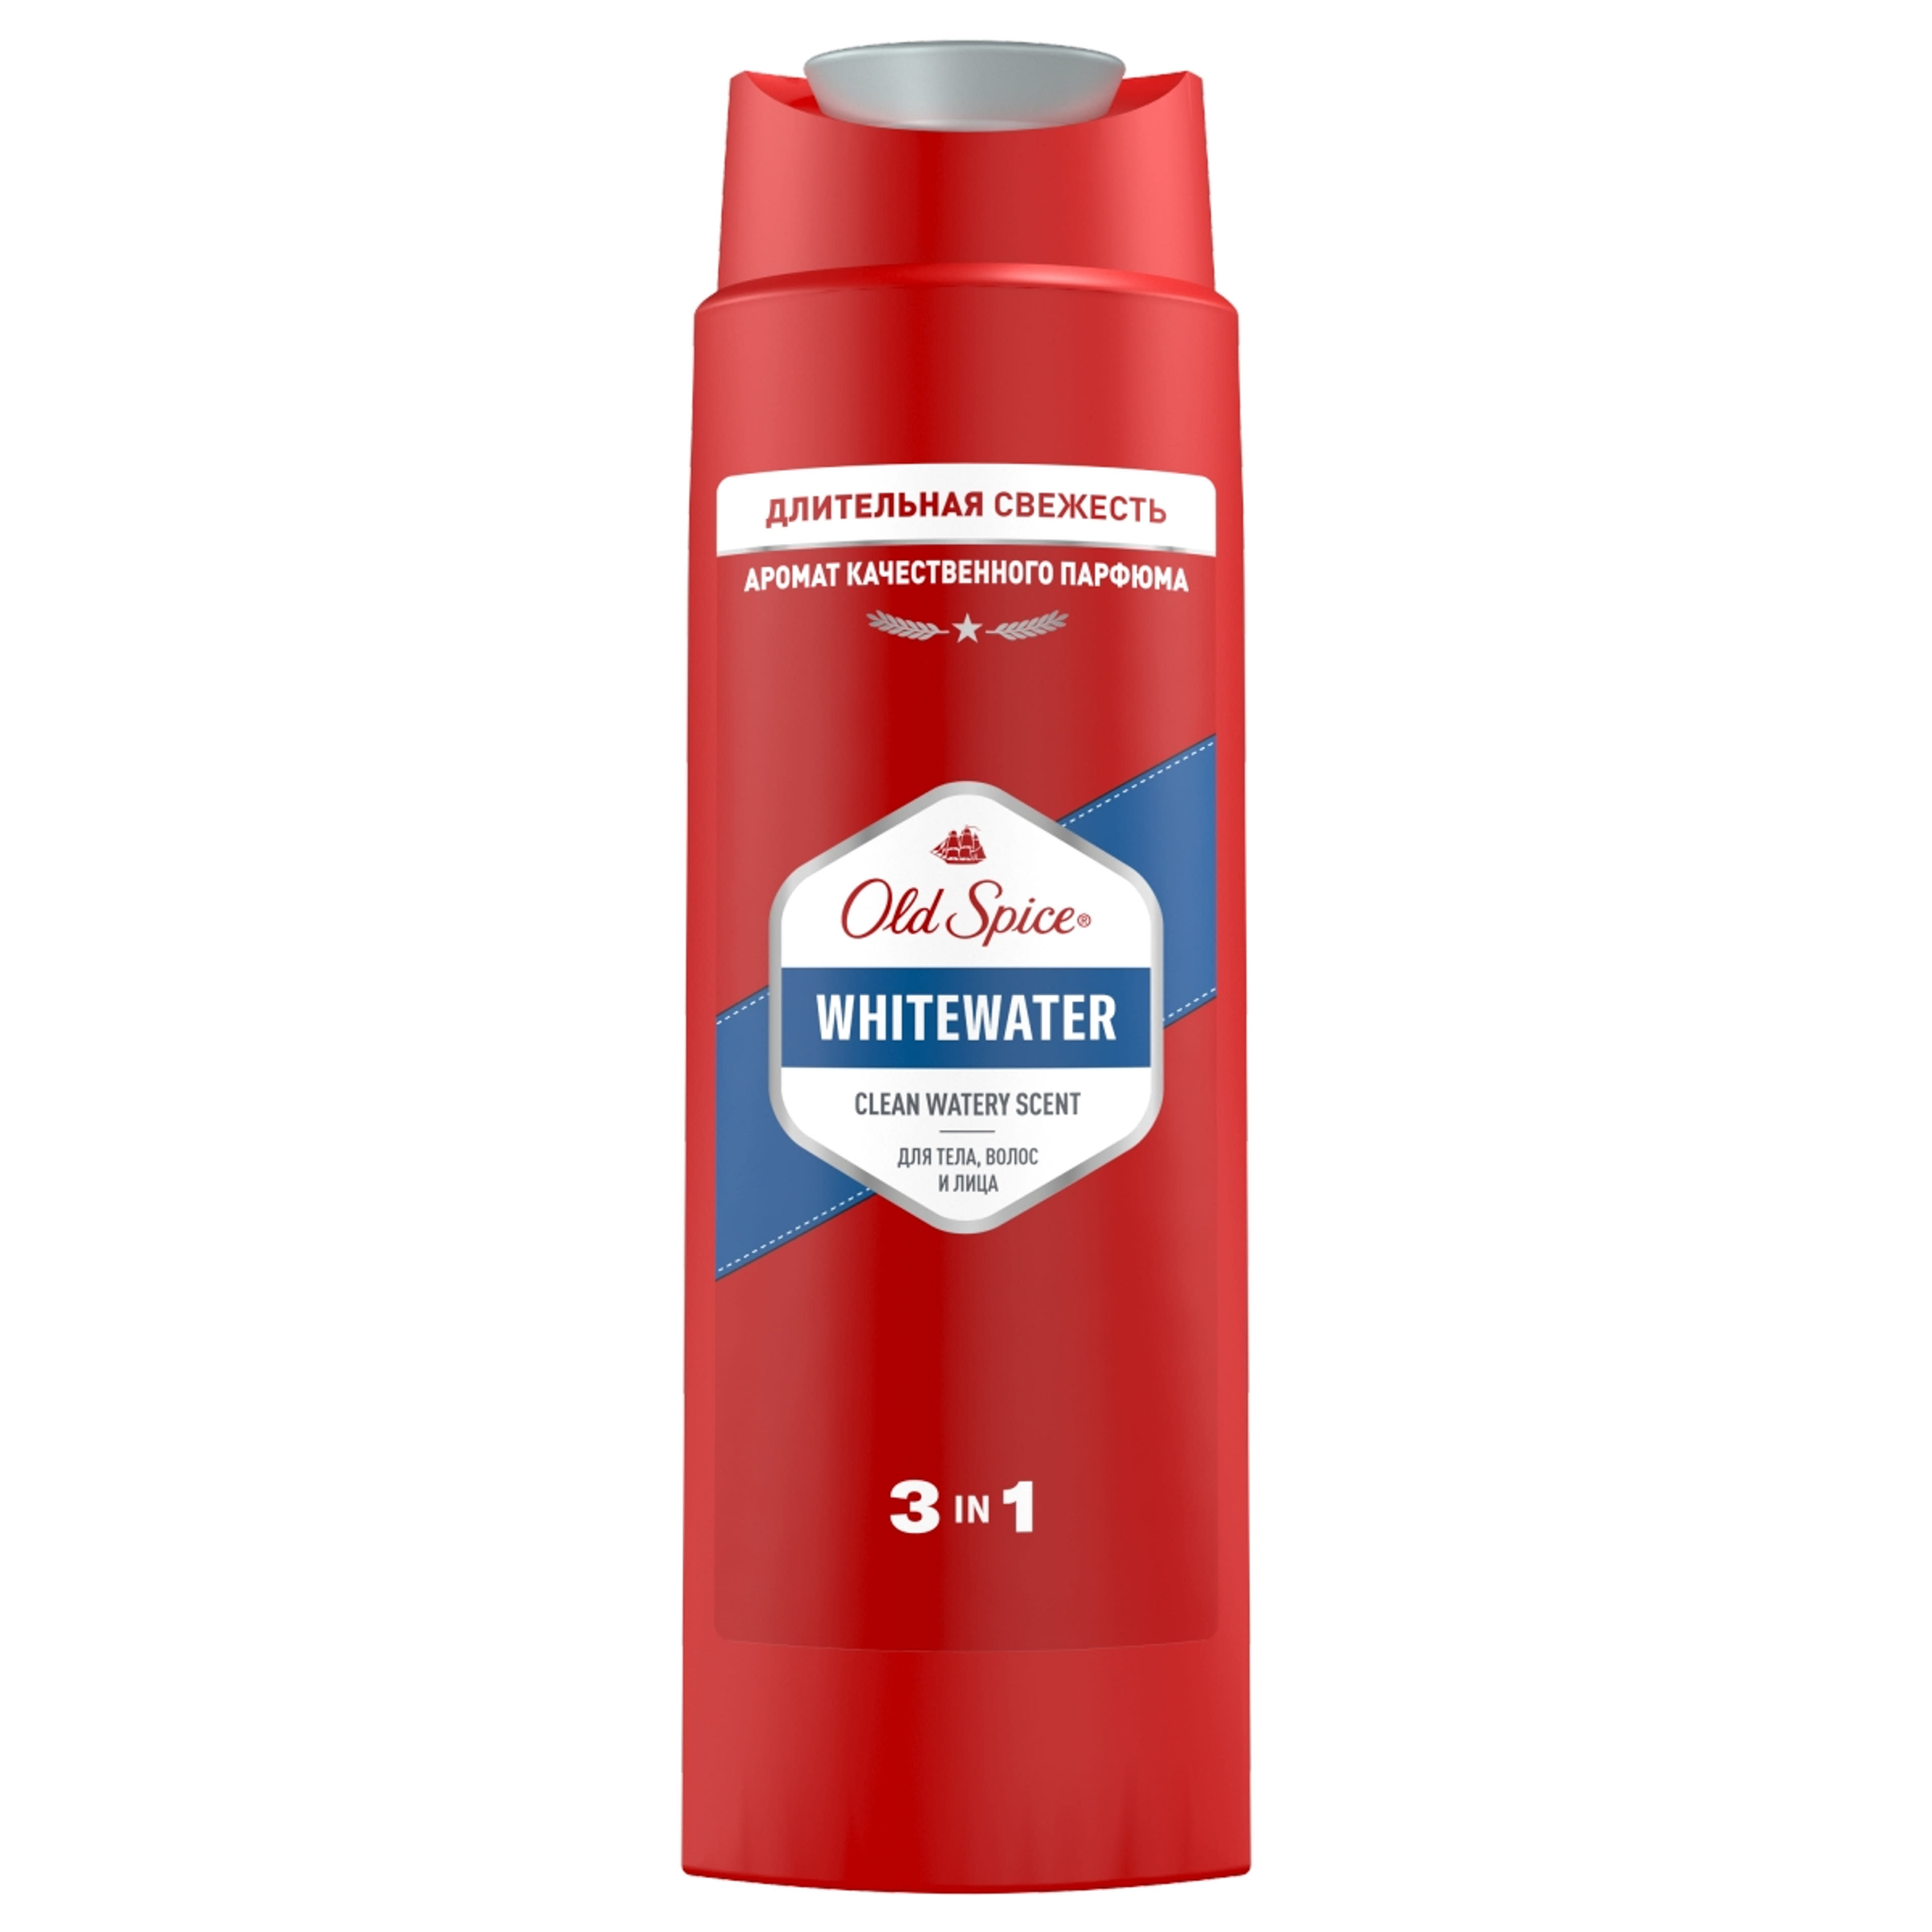 Old Spice Whitewater tusfürdo - 250 ml-1